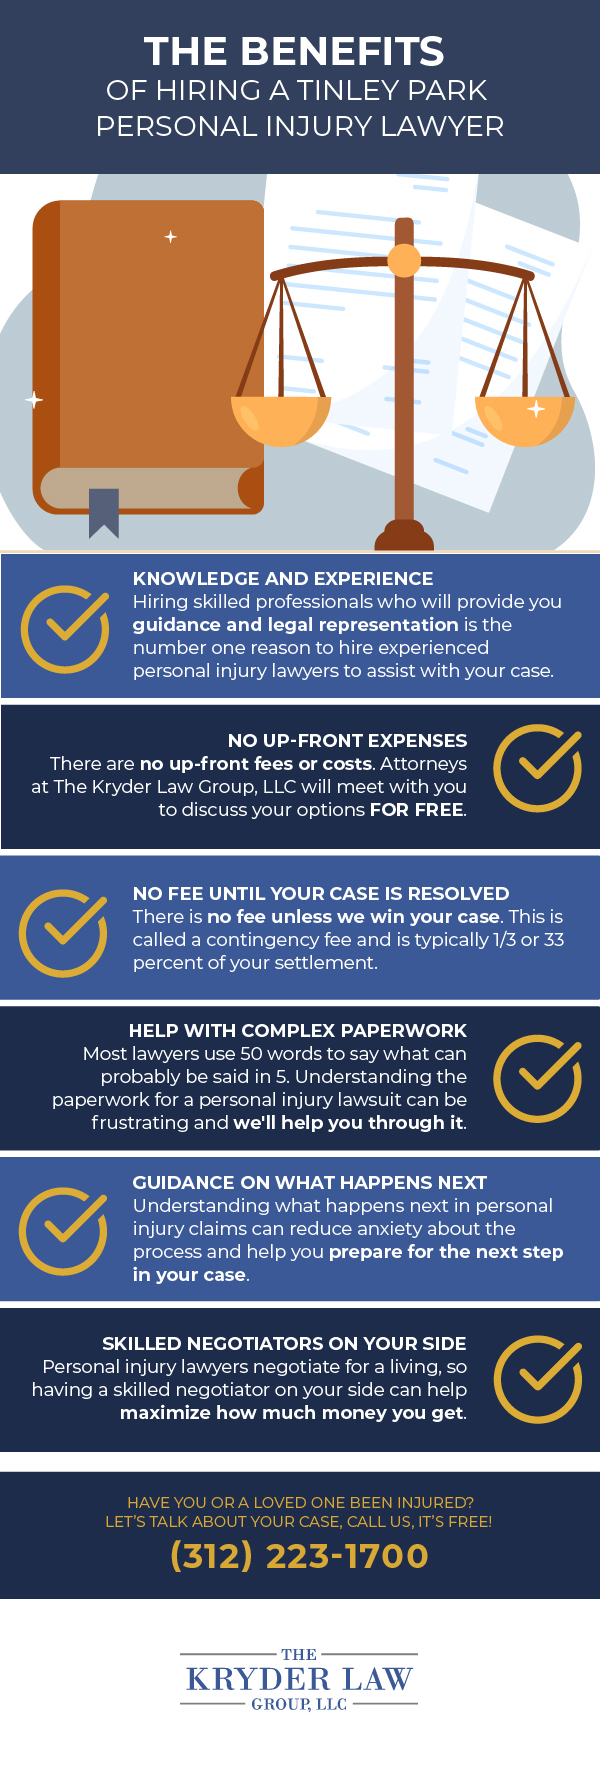 The Benefits of Hiring a Tinley Park Personal Injury Lawyer Infographic